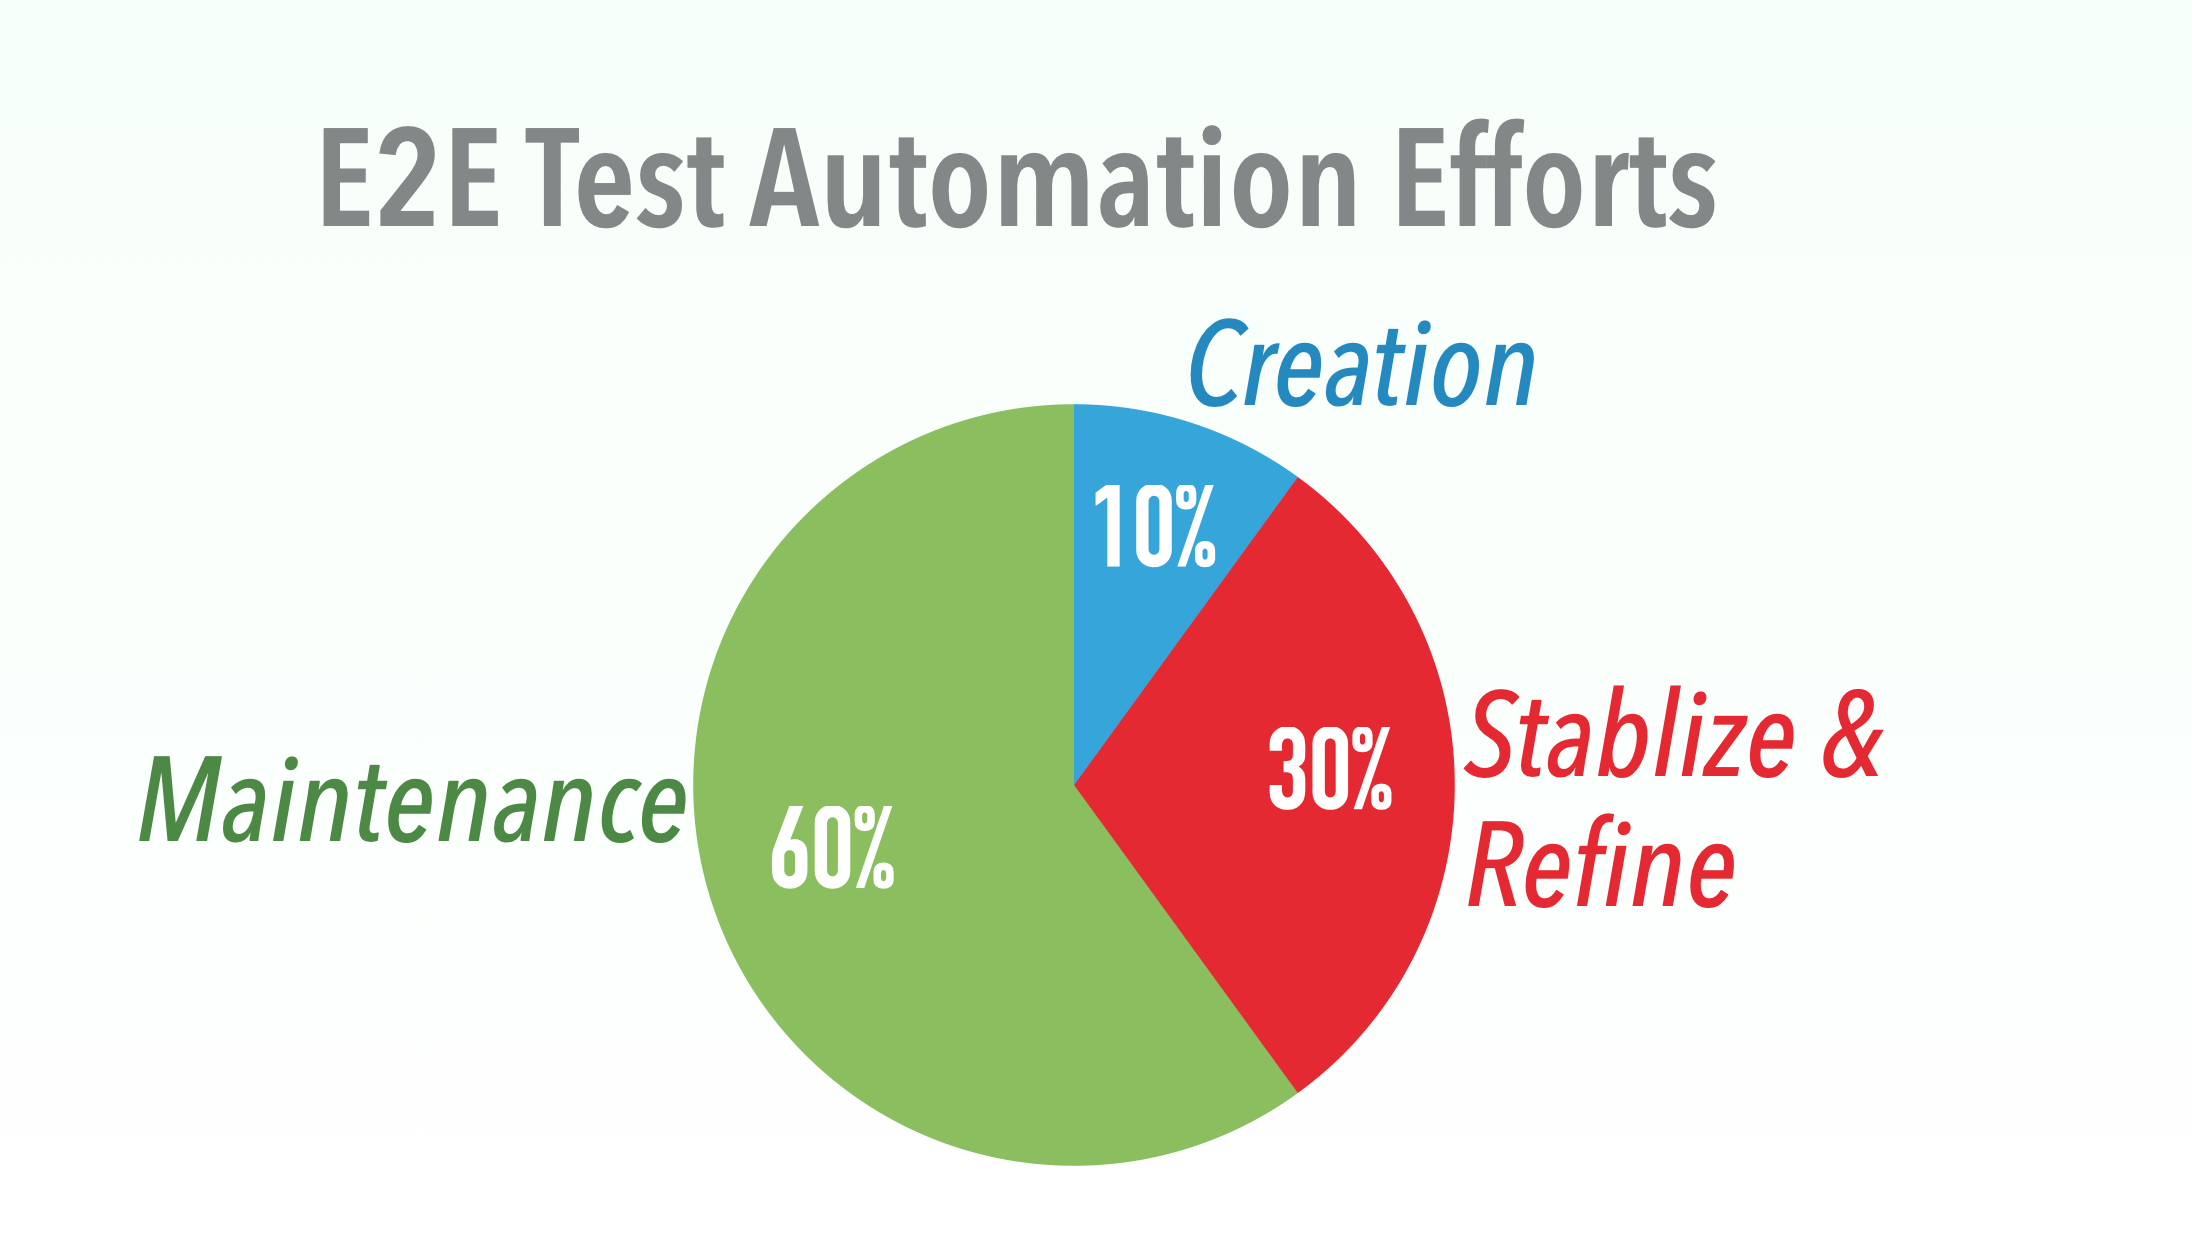 Three Types of Efforts in E2E (UI) Test Automation Clarified